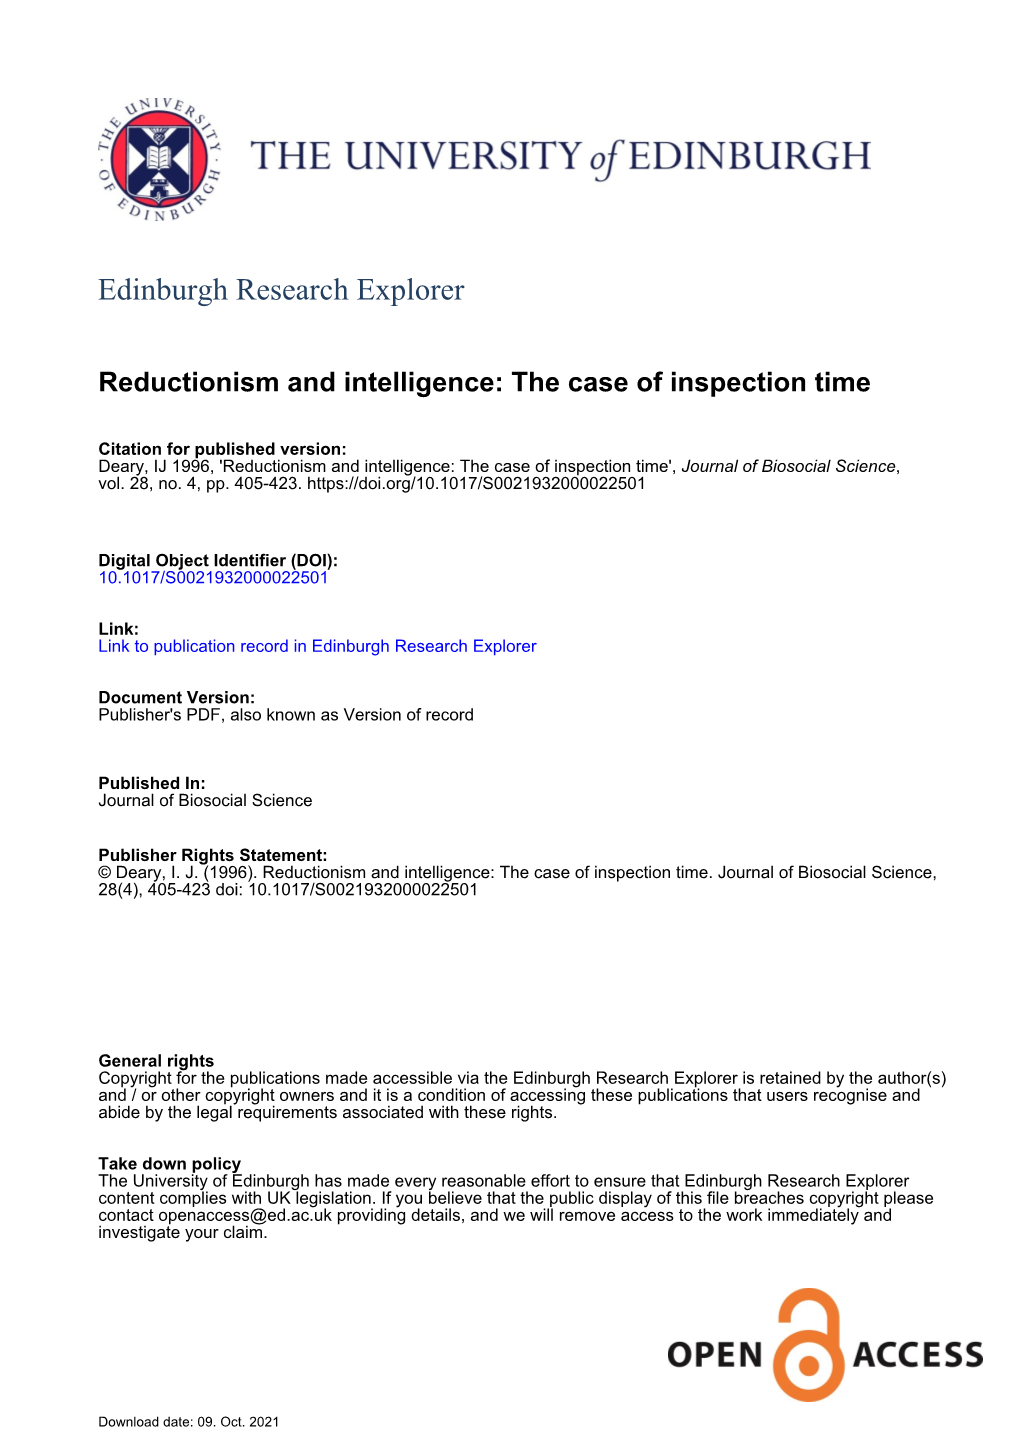 Reductionism and Intelligence: the Case of Inspection Time